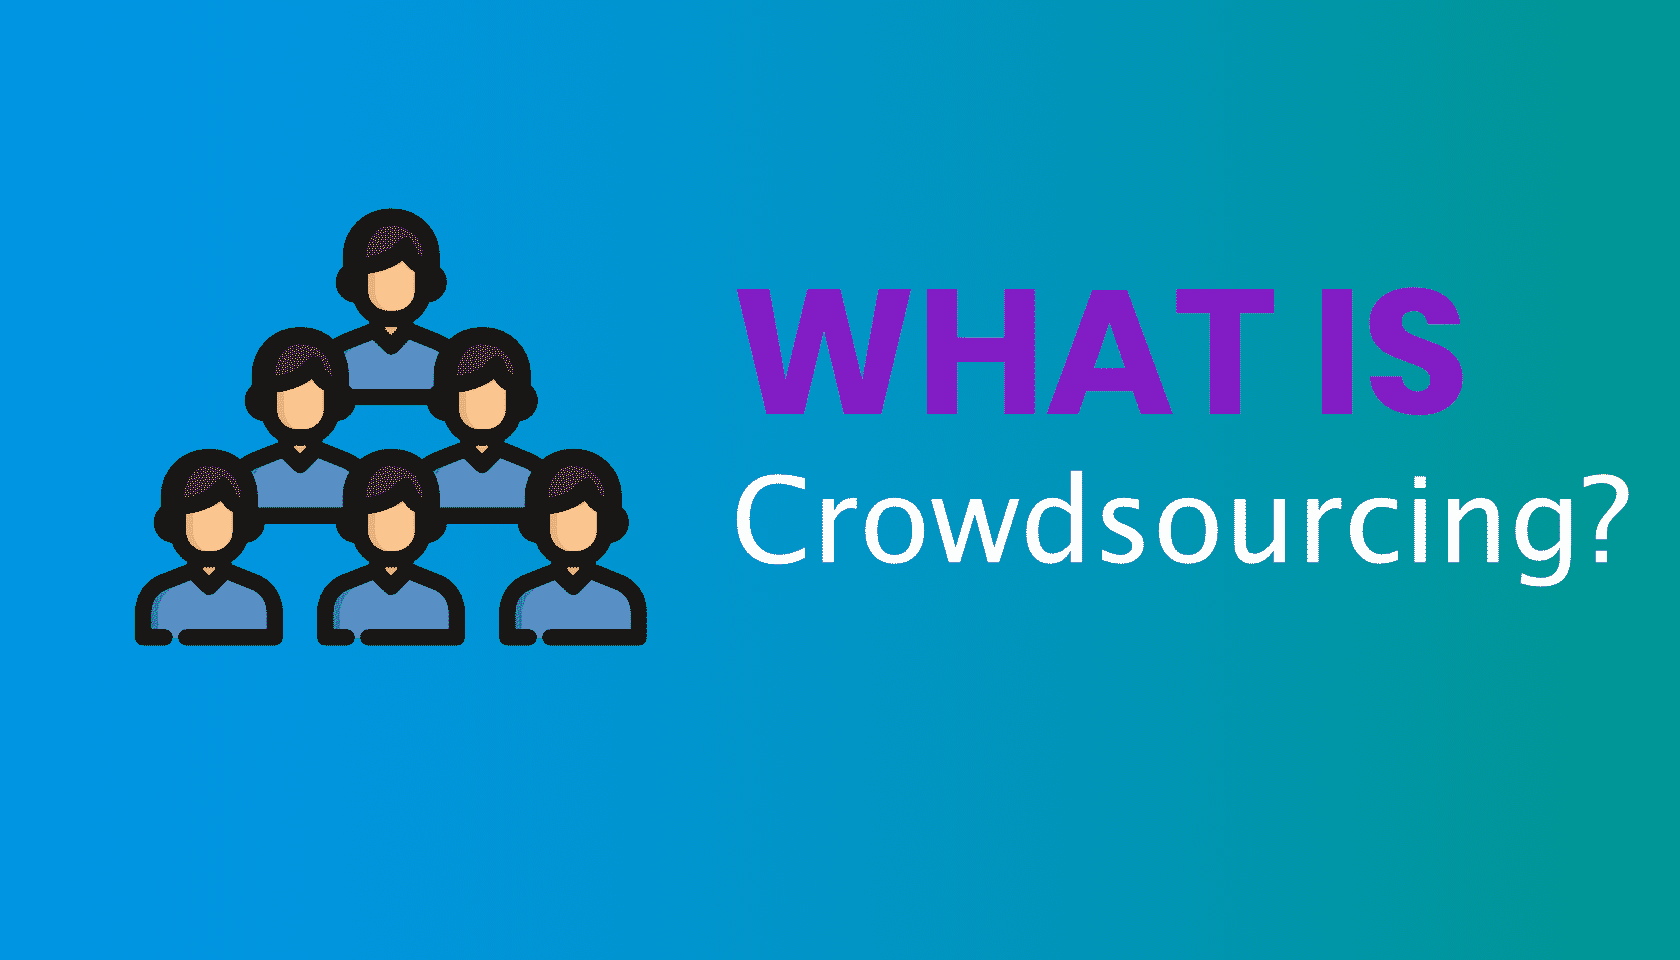 What is: Crowdsourcing